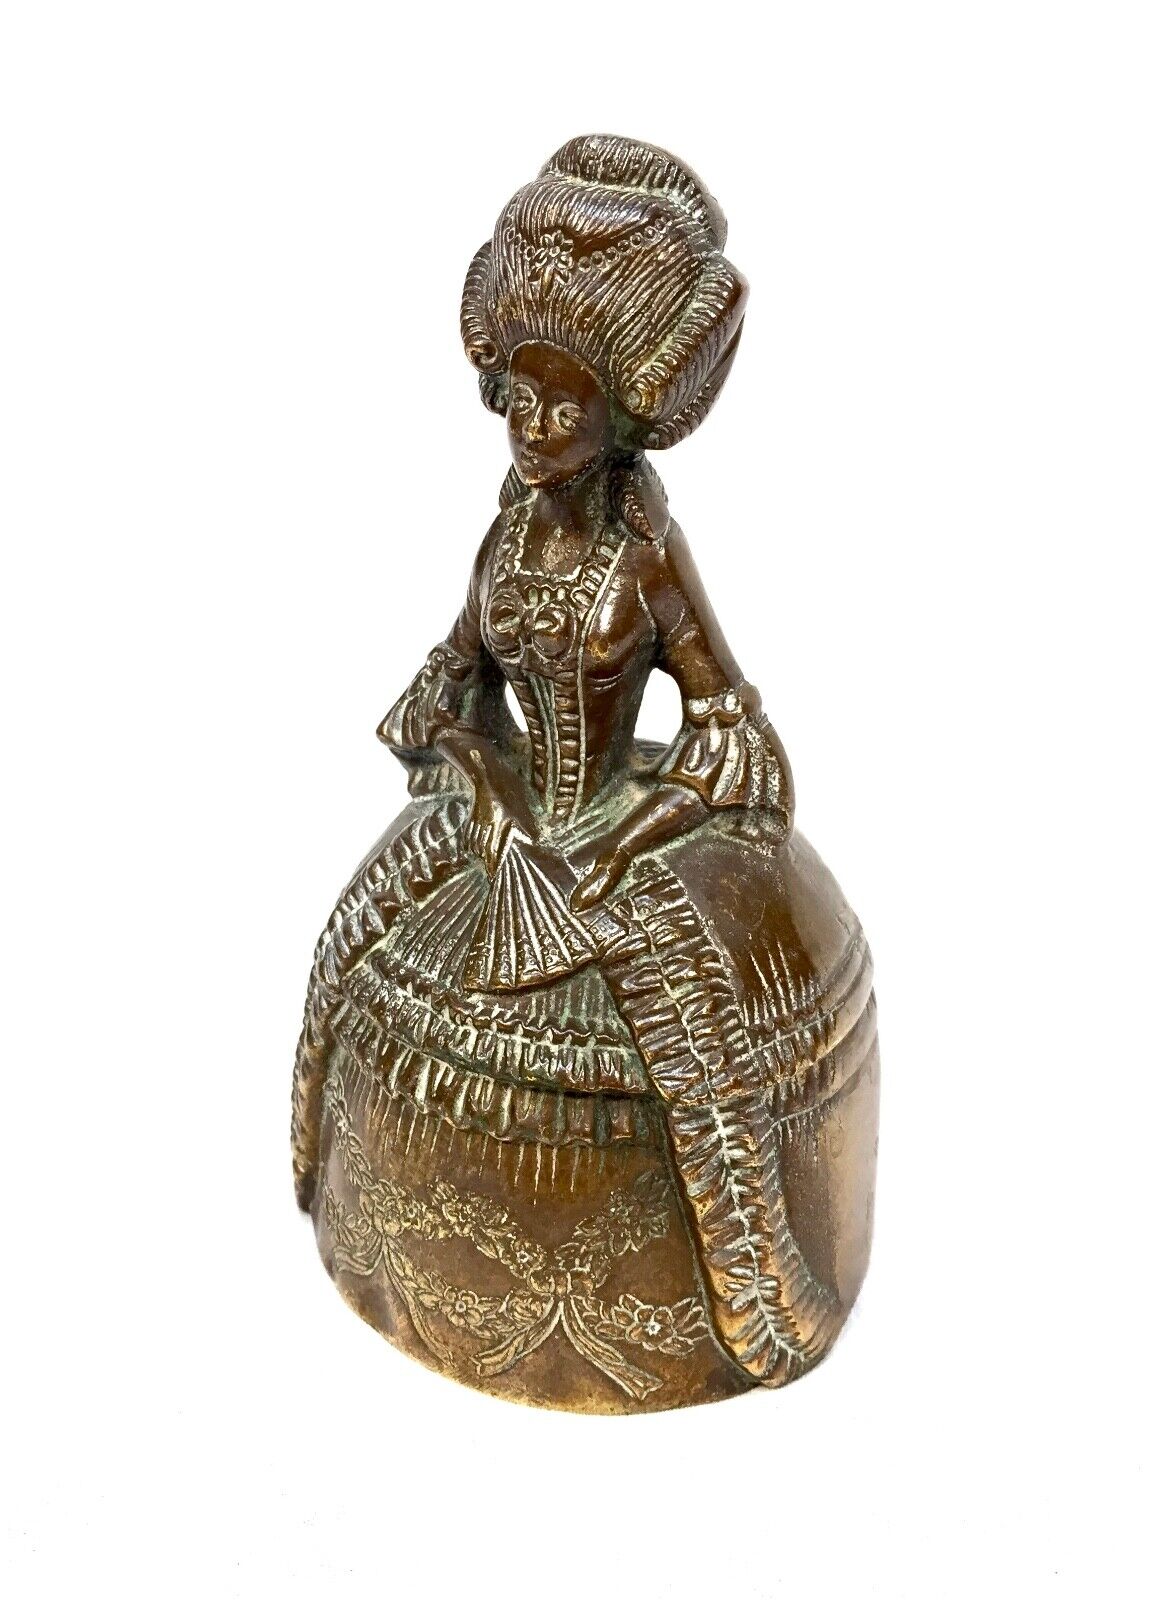 Antique Brass Bell in the Form of a Victorian Dressed Lady / Early 20th Century